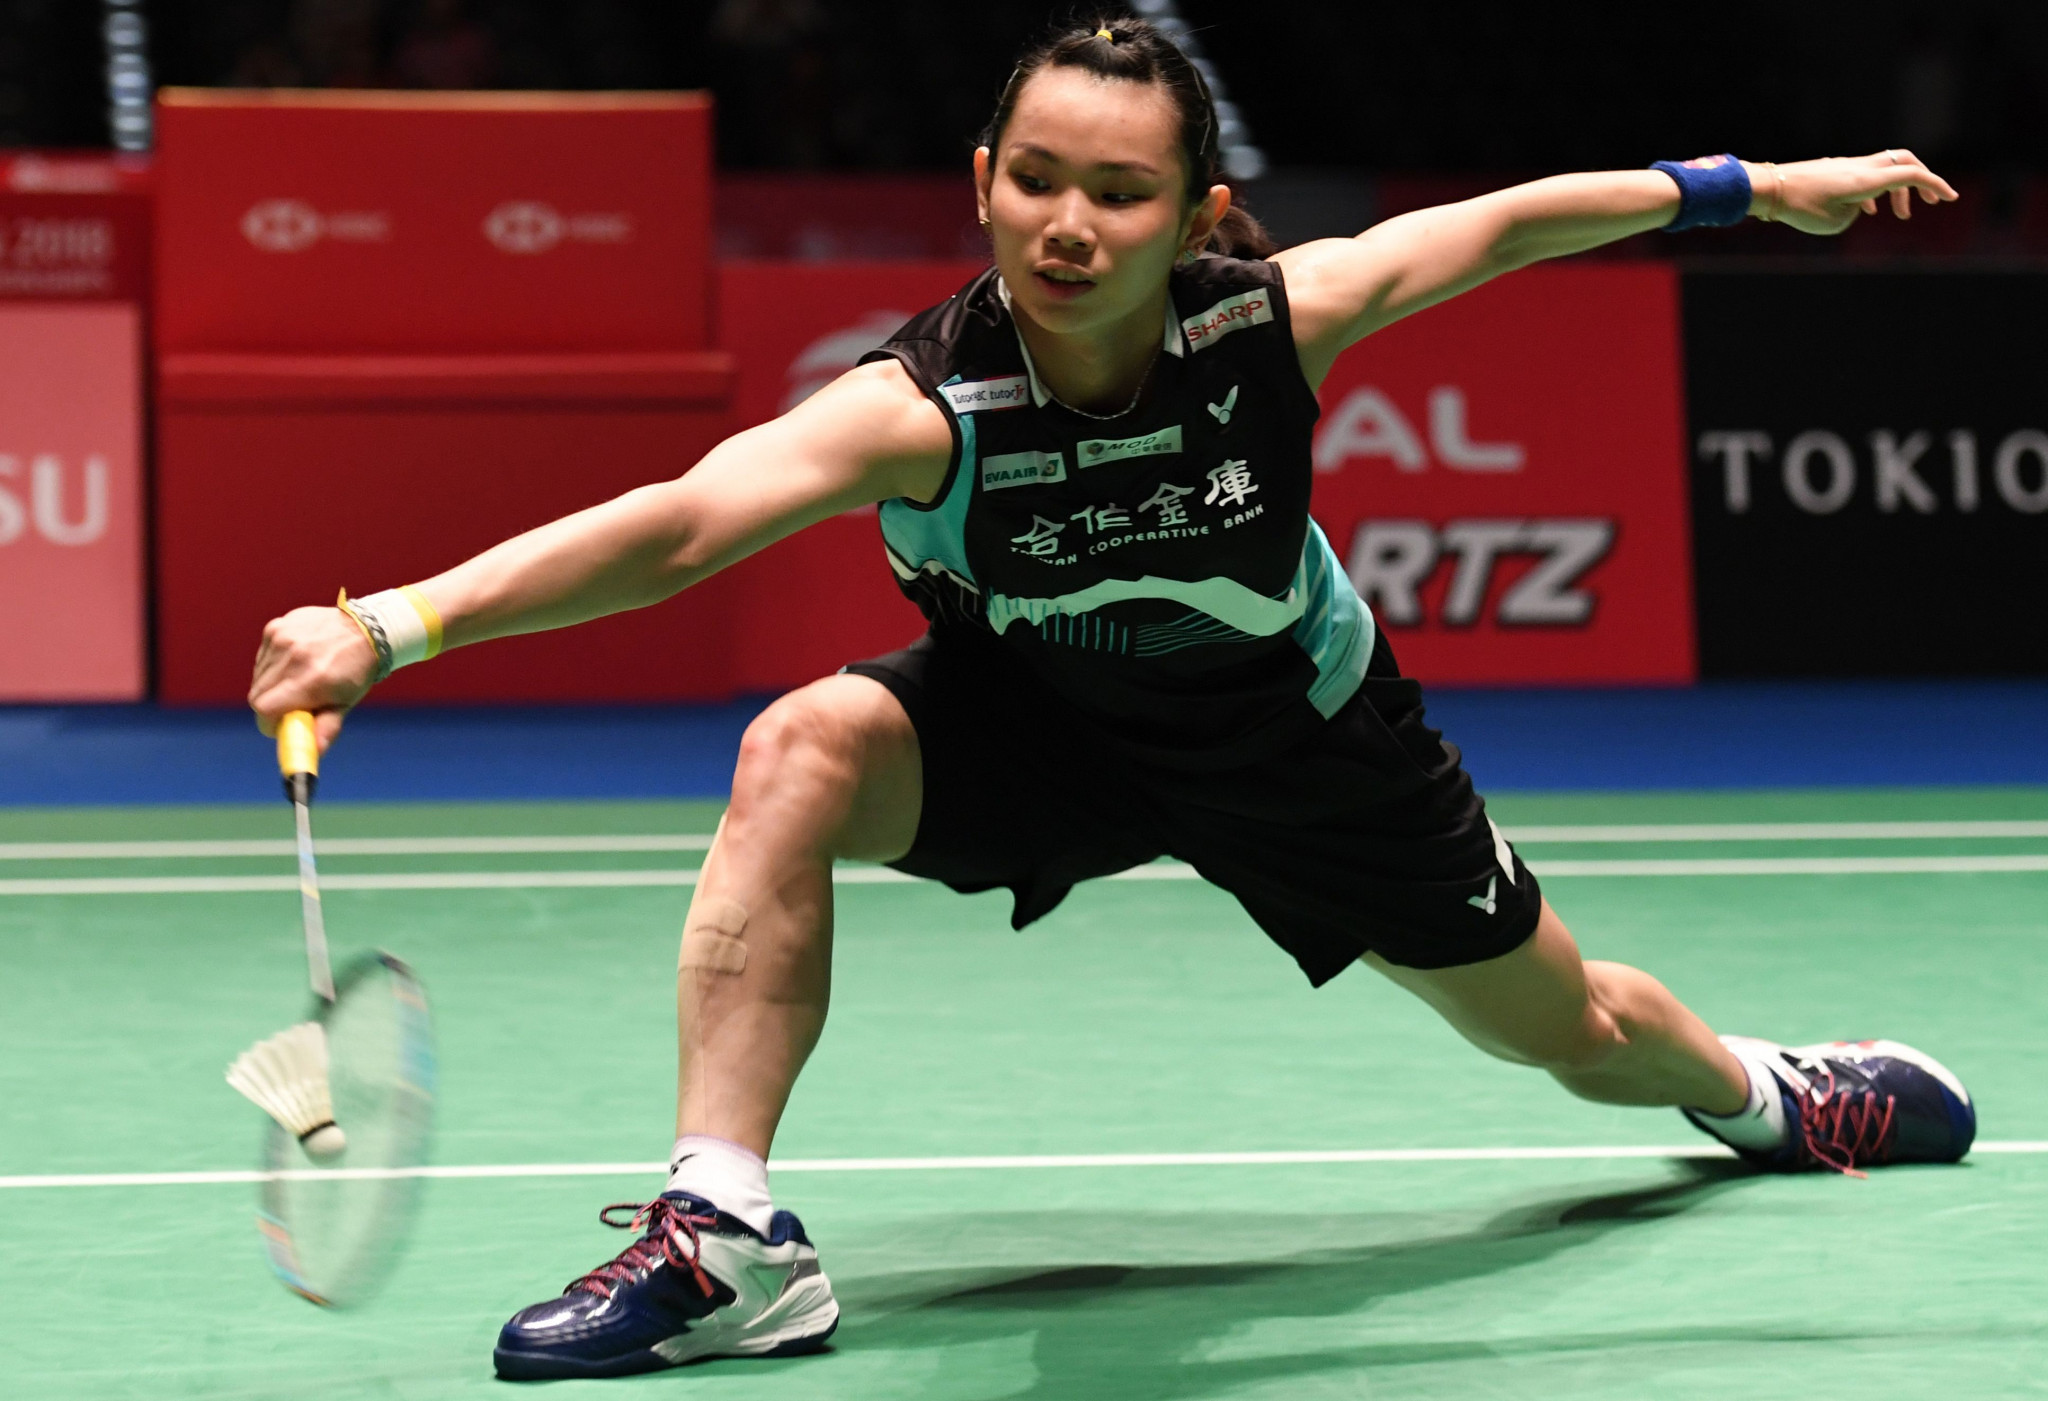 Women's top seed Tai Tzu-ying has booked her place in the second round ©Getty Images